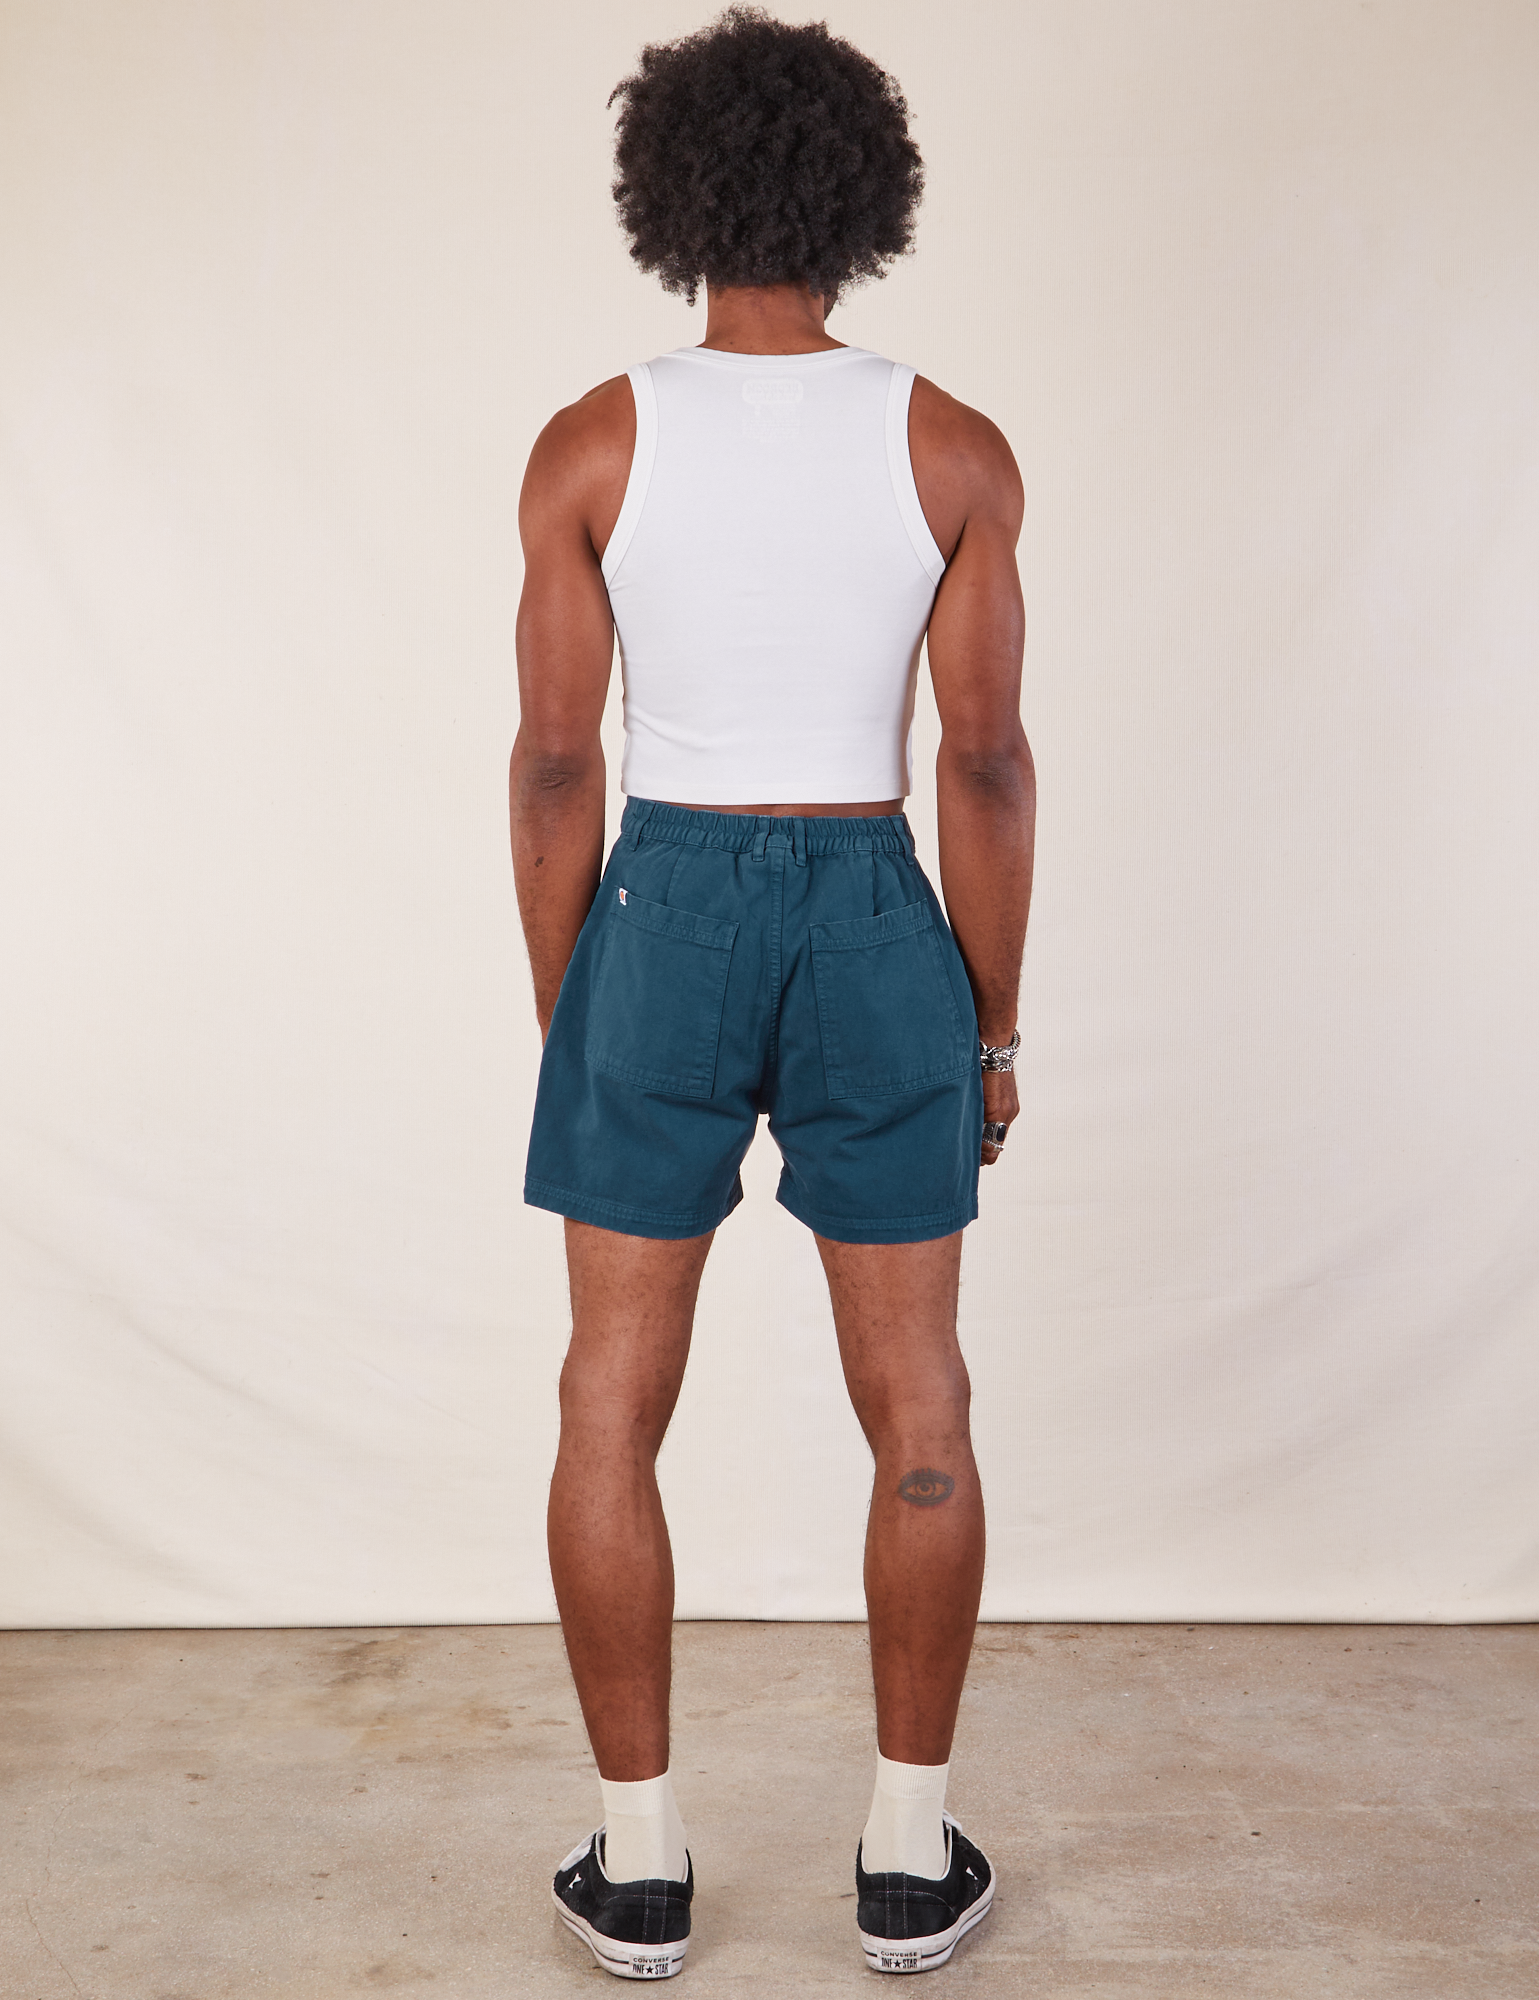 Back view of Western Shorts in Lagoon and Cropped Tank in vintage tee off-white on Jerrod